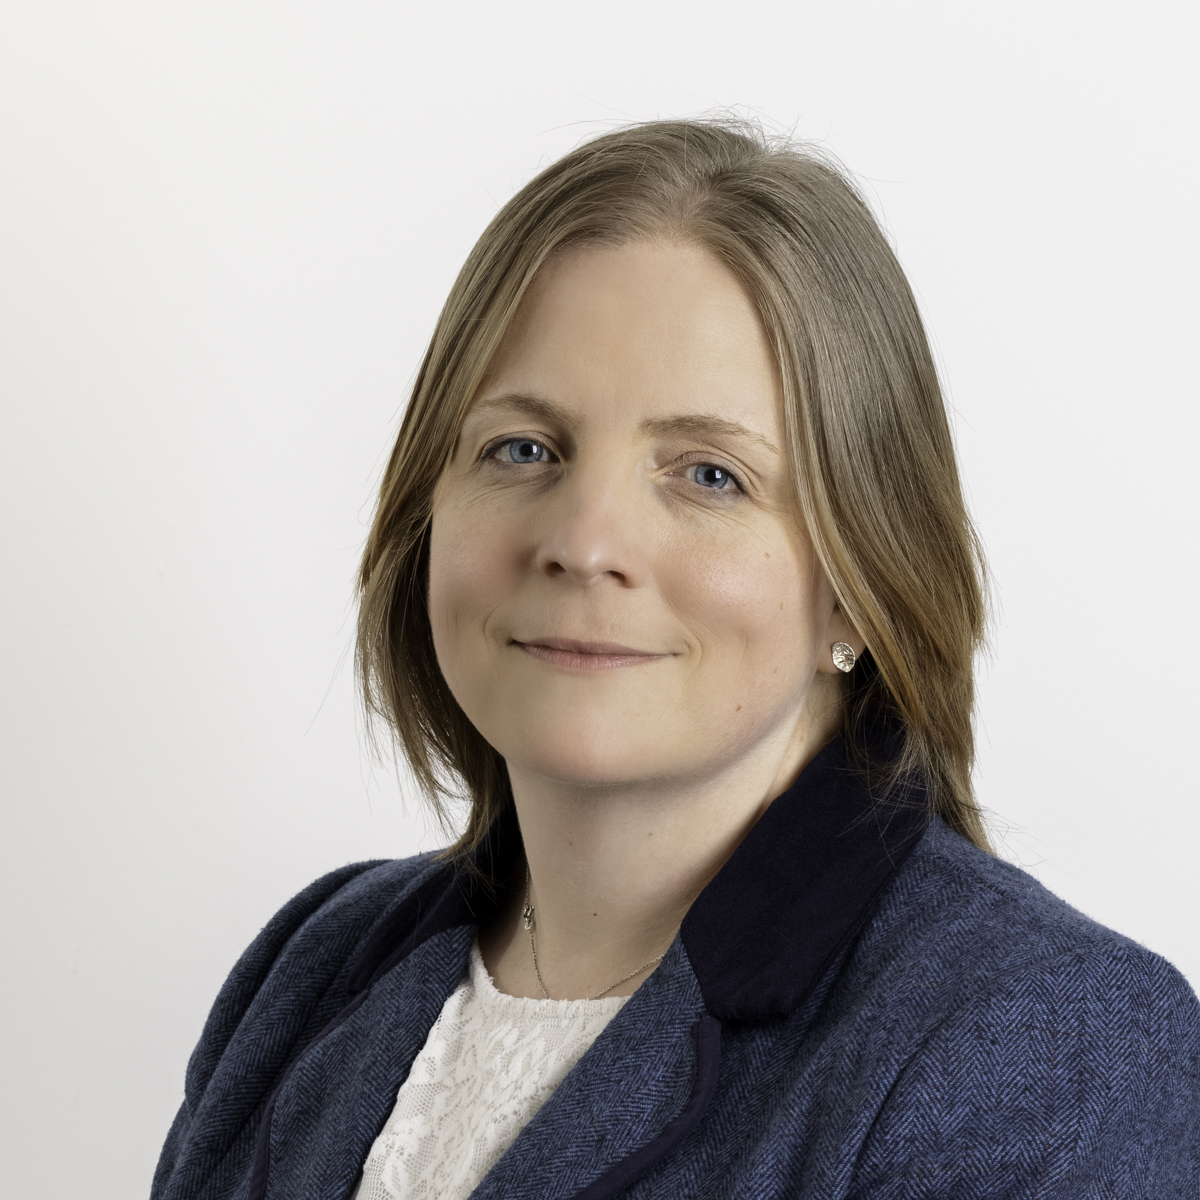 Saffery Champness appoints Margi Campbell as partner in Inverness office